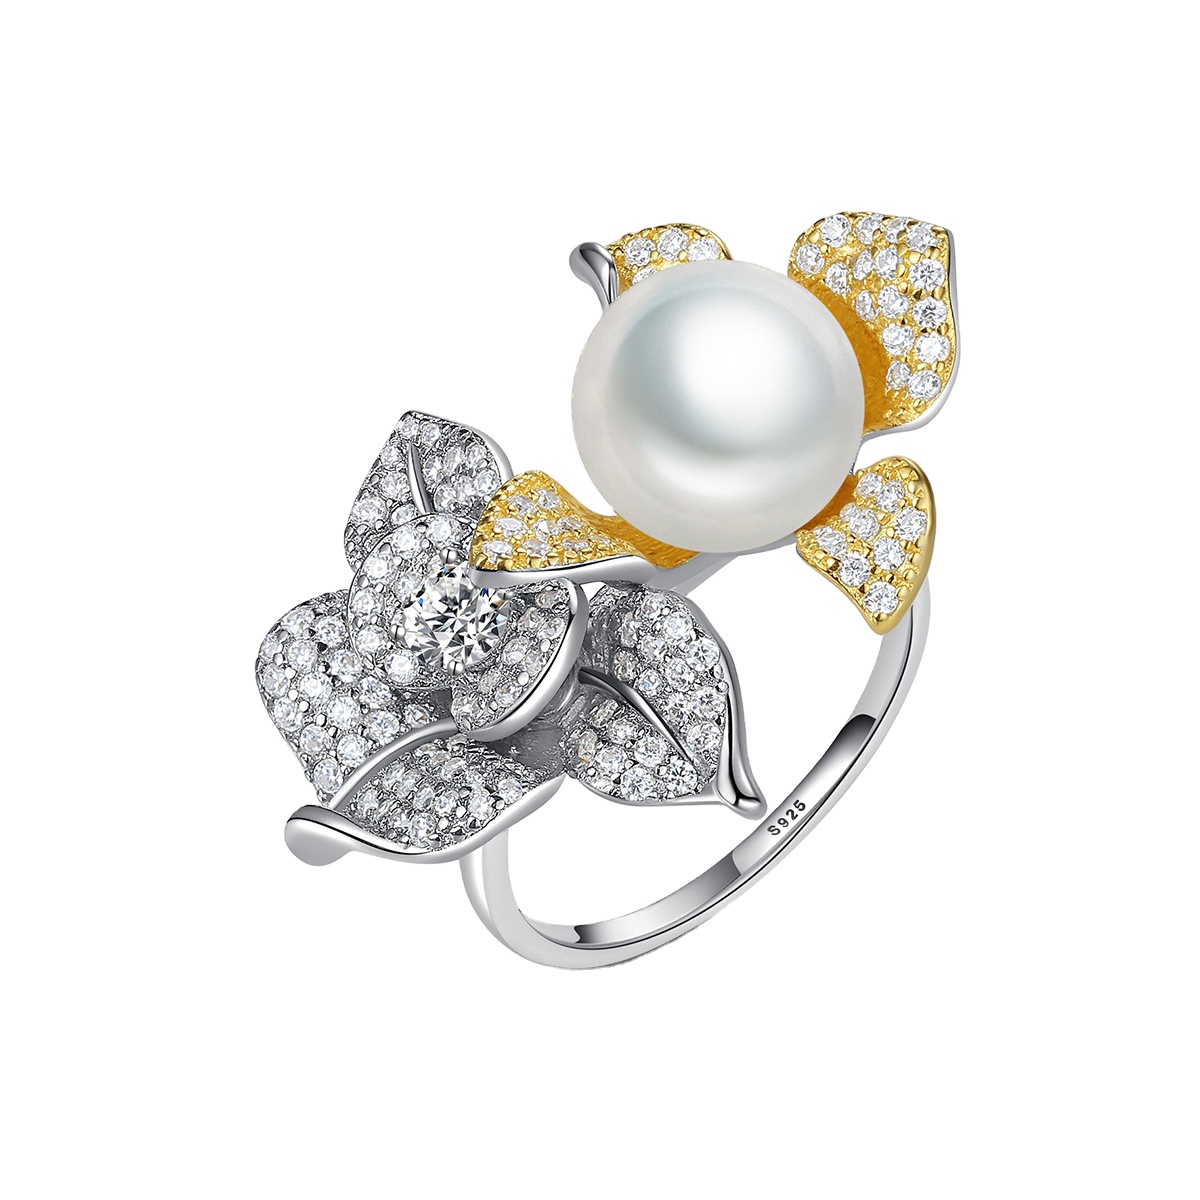 Cz White Pearl Glass Bead Rose Shaped Rhodium Plated Sterling Silver Ring